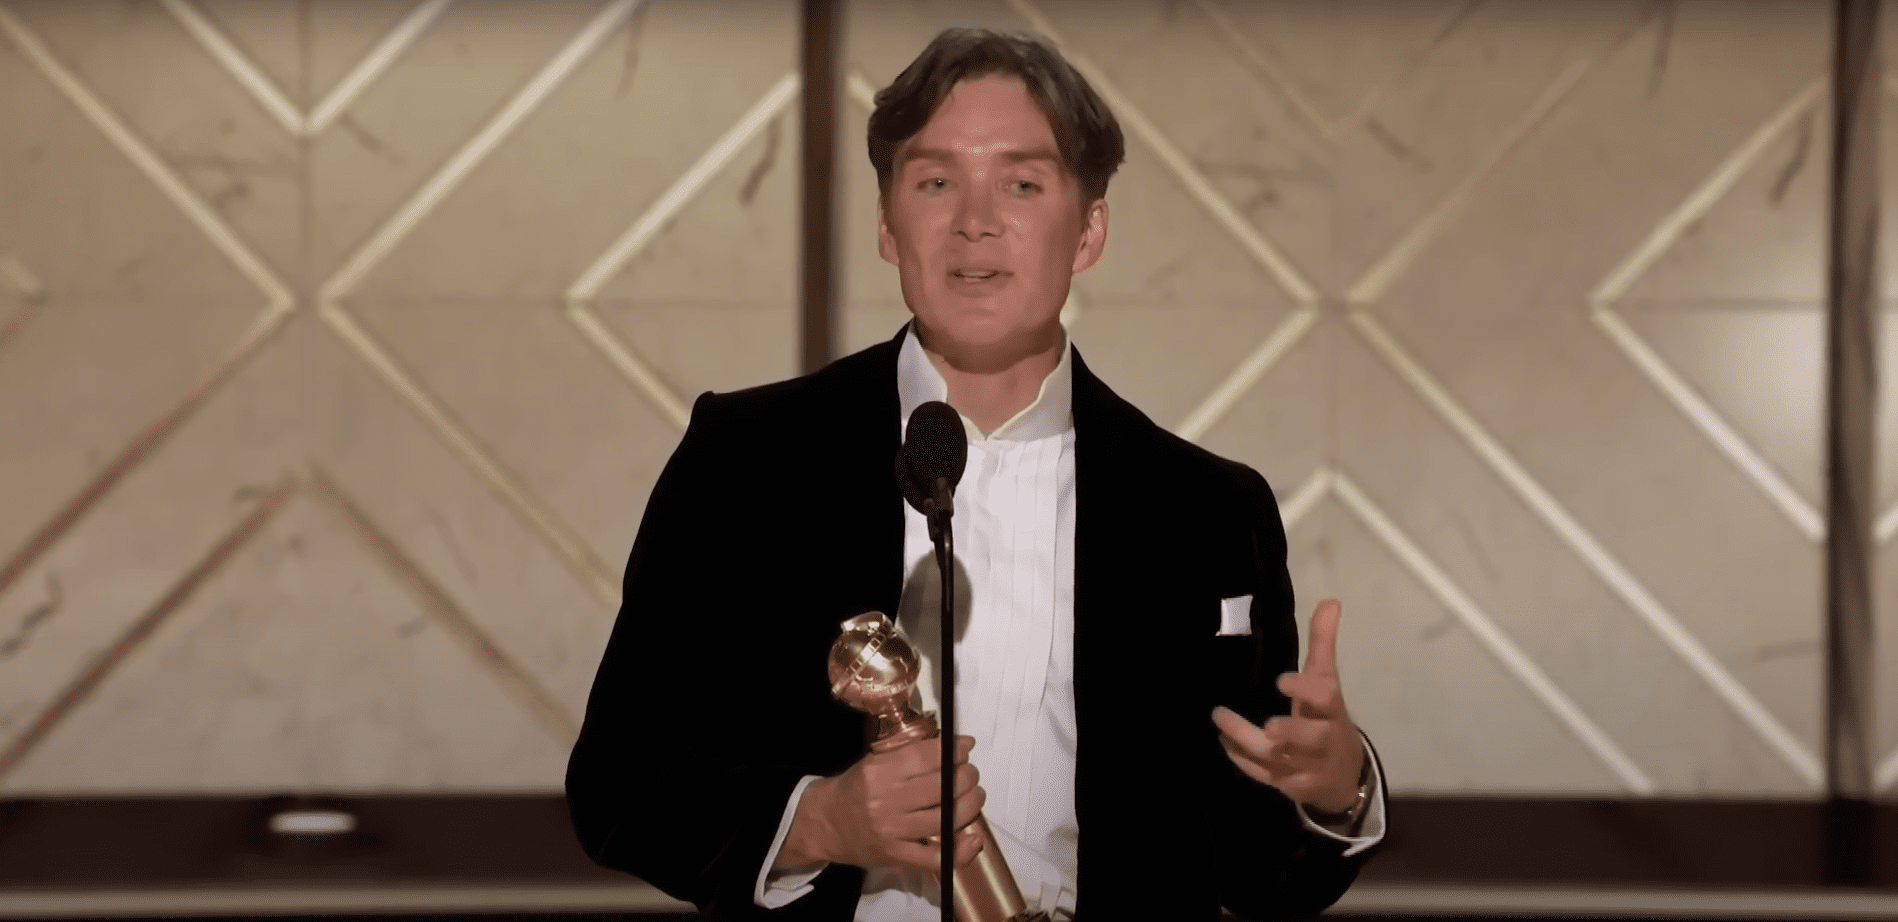 Cillian Murphy Shocks the Internet With Unbelievable Secrets at the Golden Globes